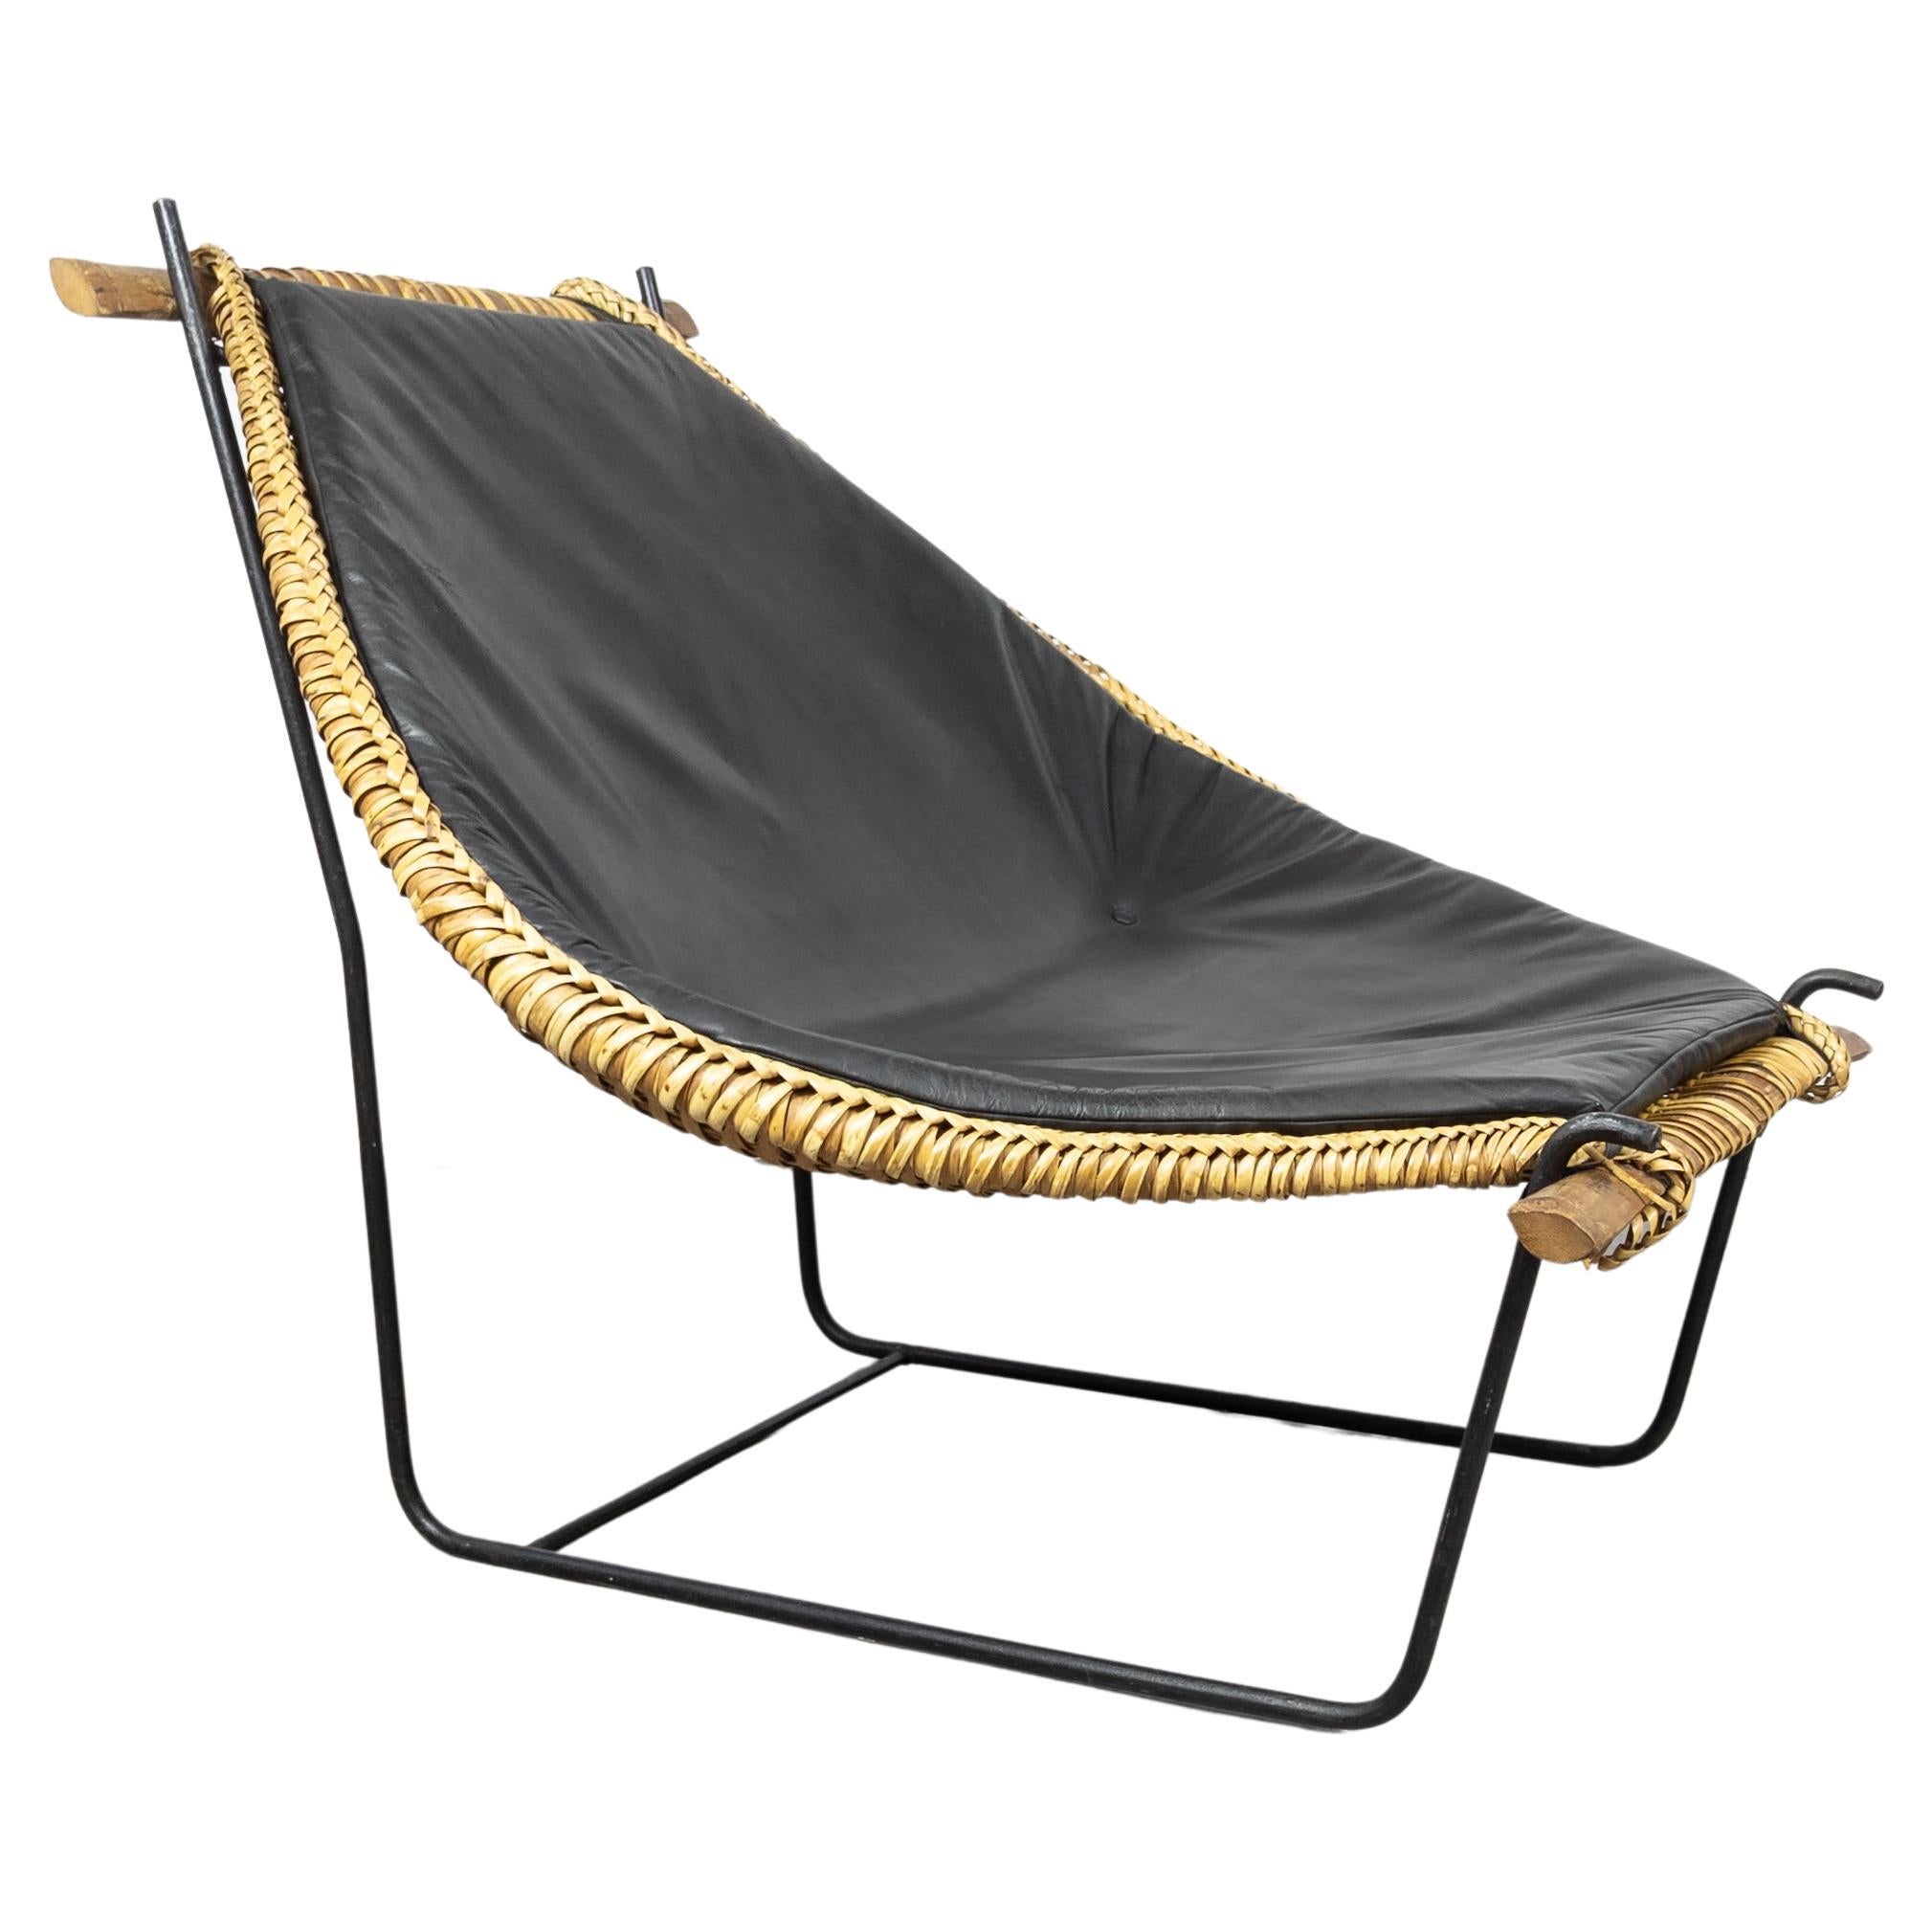 This unique lounge chair was designed in 1953 by John Risley for Ficks Reed. A combination of braiding and weaving techniques were used to create the rattan 'basket,' which is anchored at both top and bottom by carved bamboo rails. This basket seat